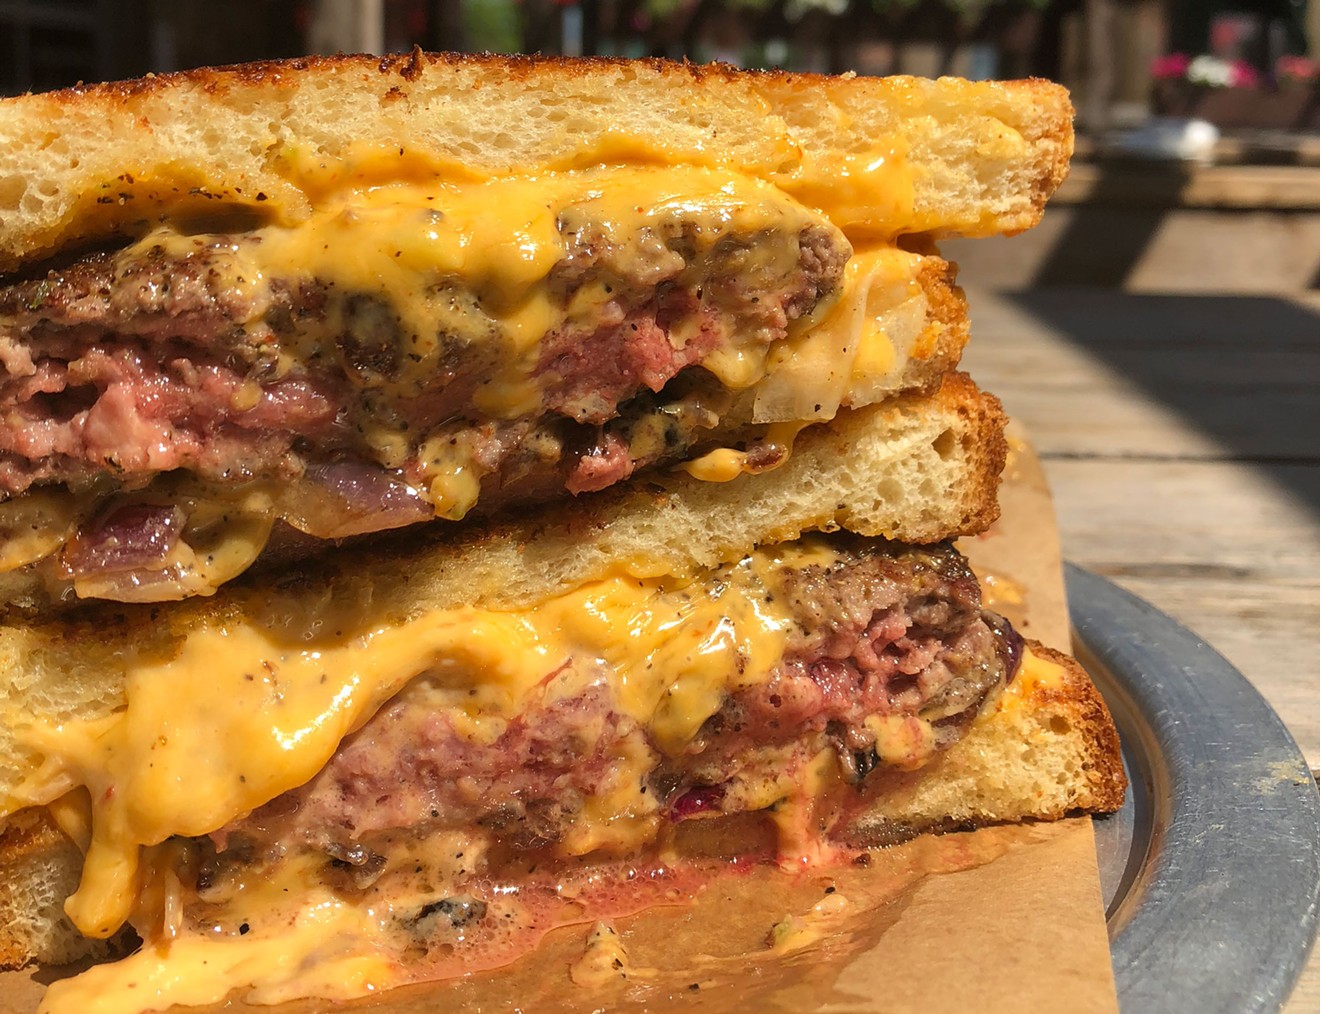 One of the new items on the menu now at Goodfriend in White Rock: a patty melt with pimento cheese.